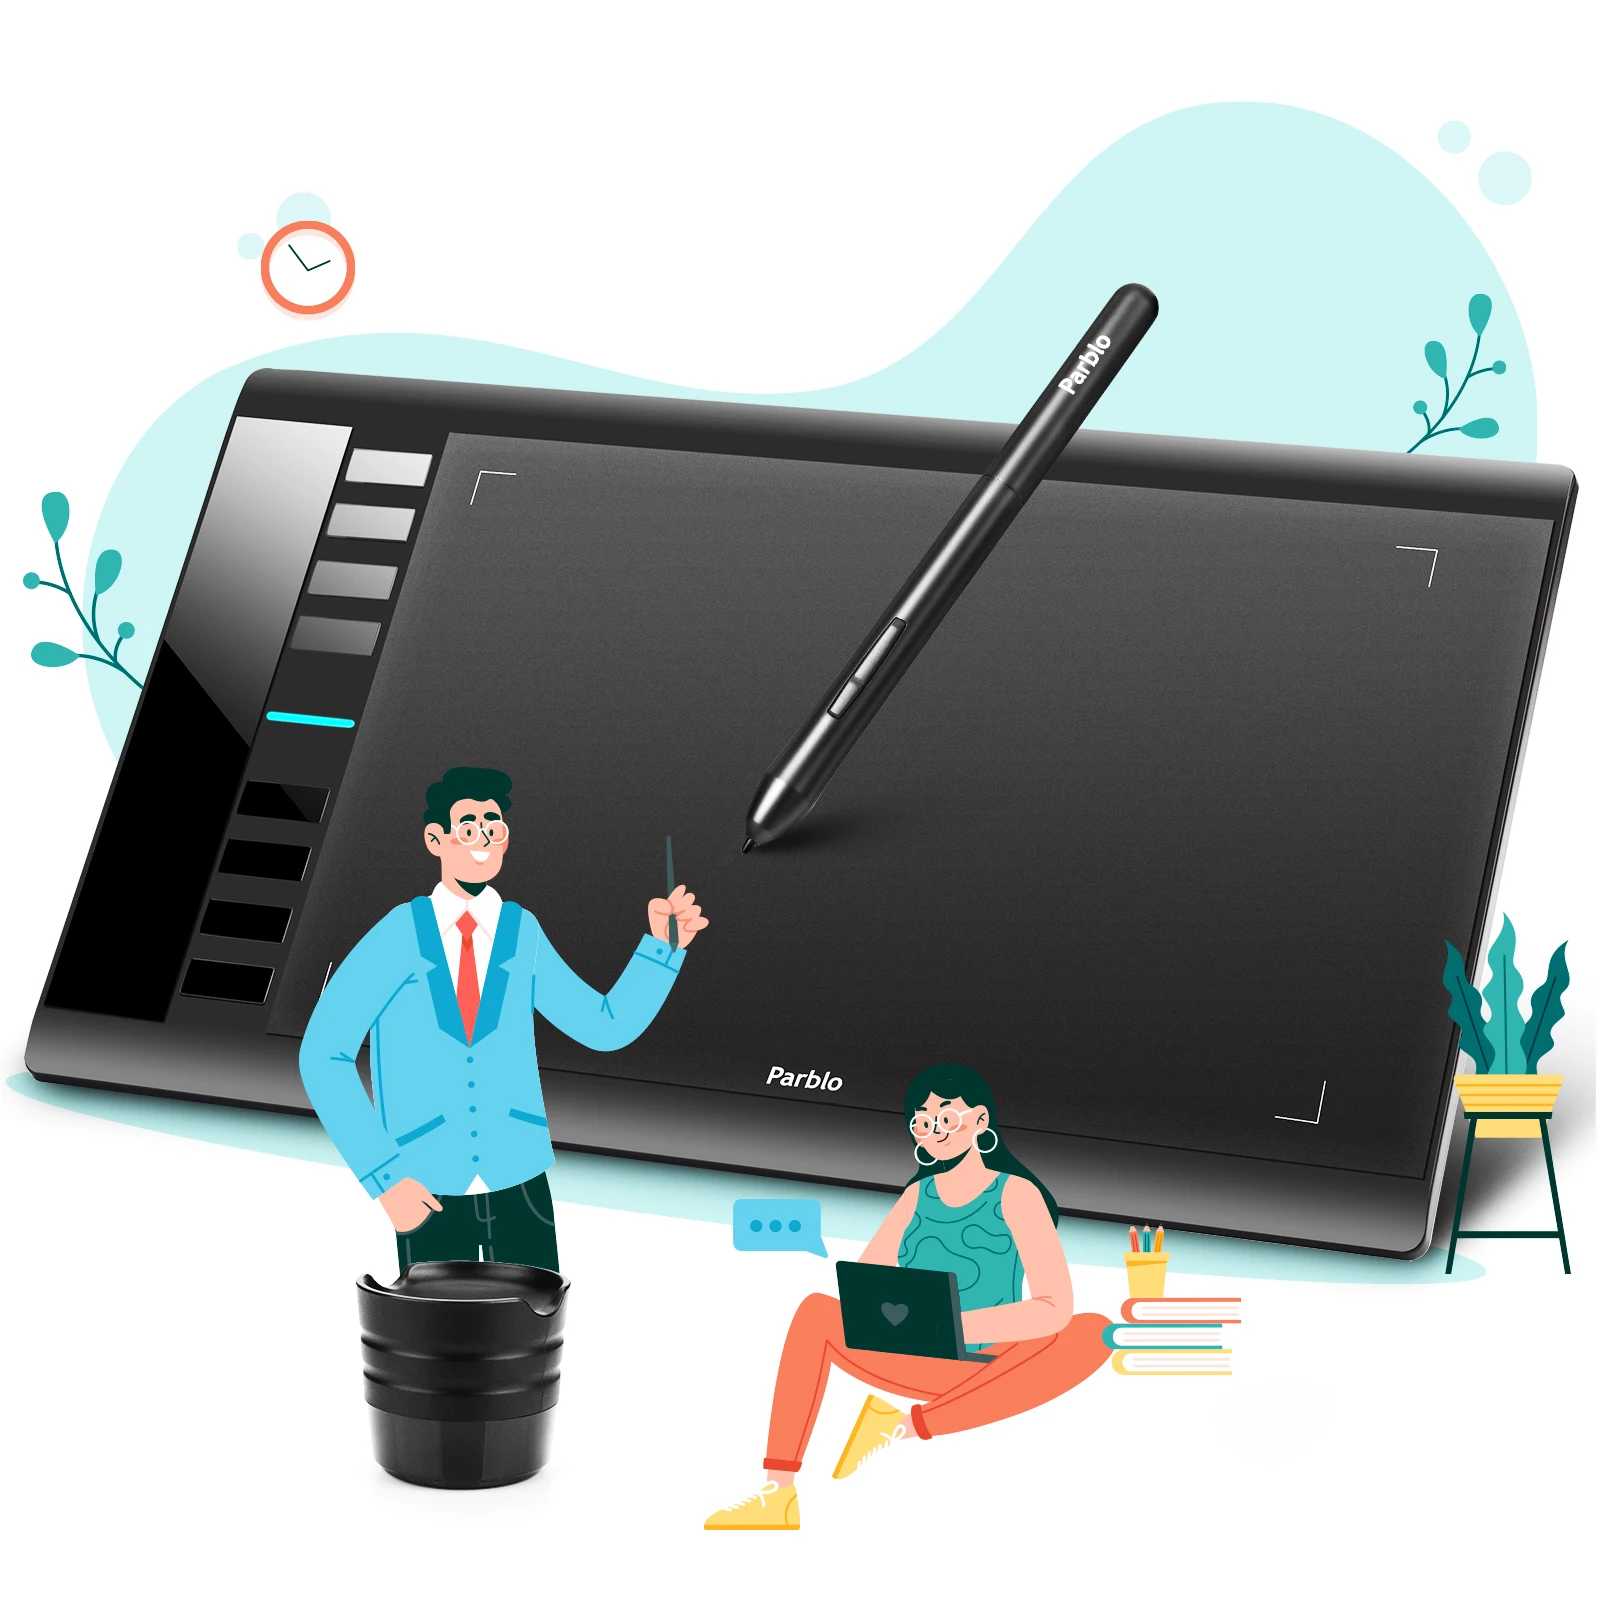 

Parblo A610 V2 Drawing Tablet Graphic Tablet 8192 Levels 10 x 6 Inches Large Working Area Battery-Free Stylus Support Win & Mac